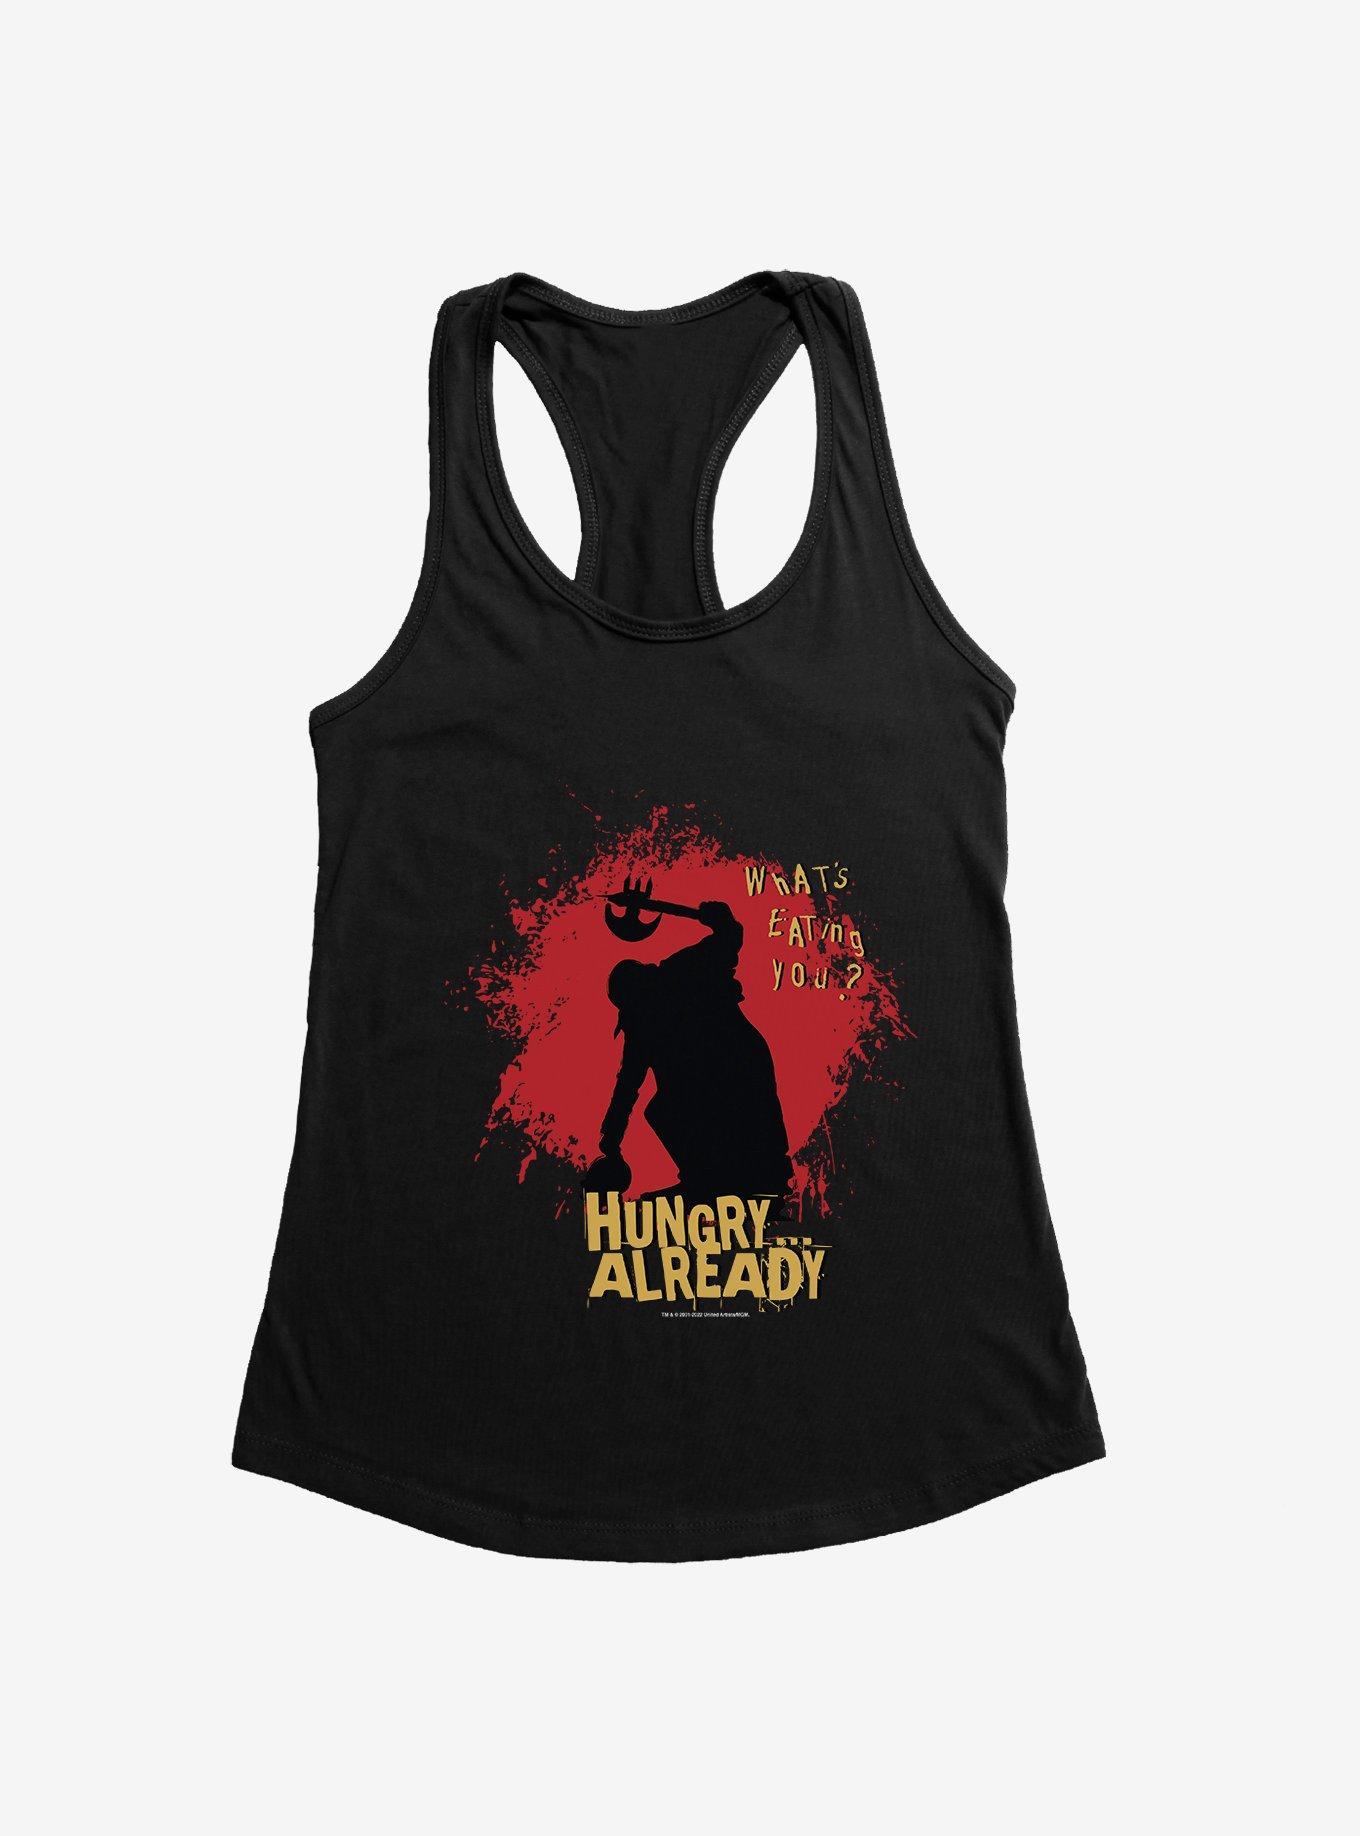 Jeepers Creepers Hungry? Already Girls Tank